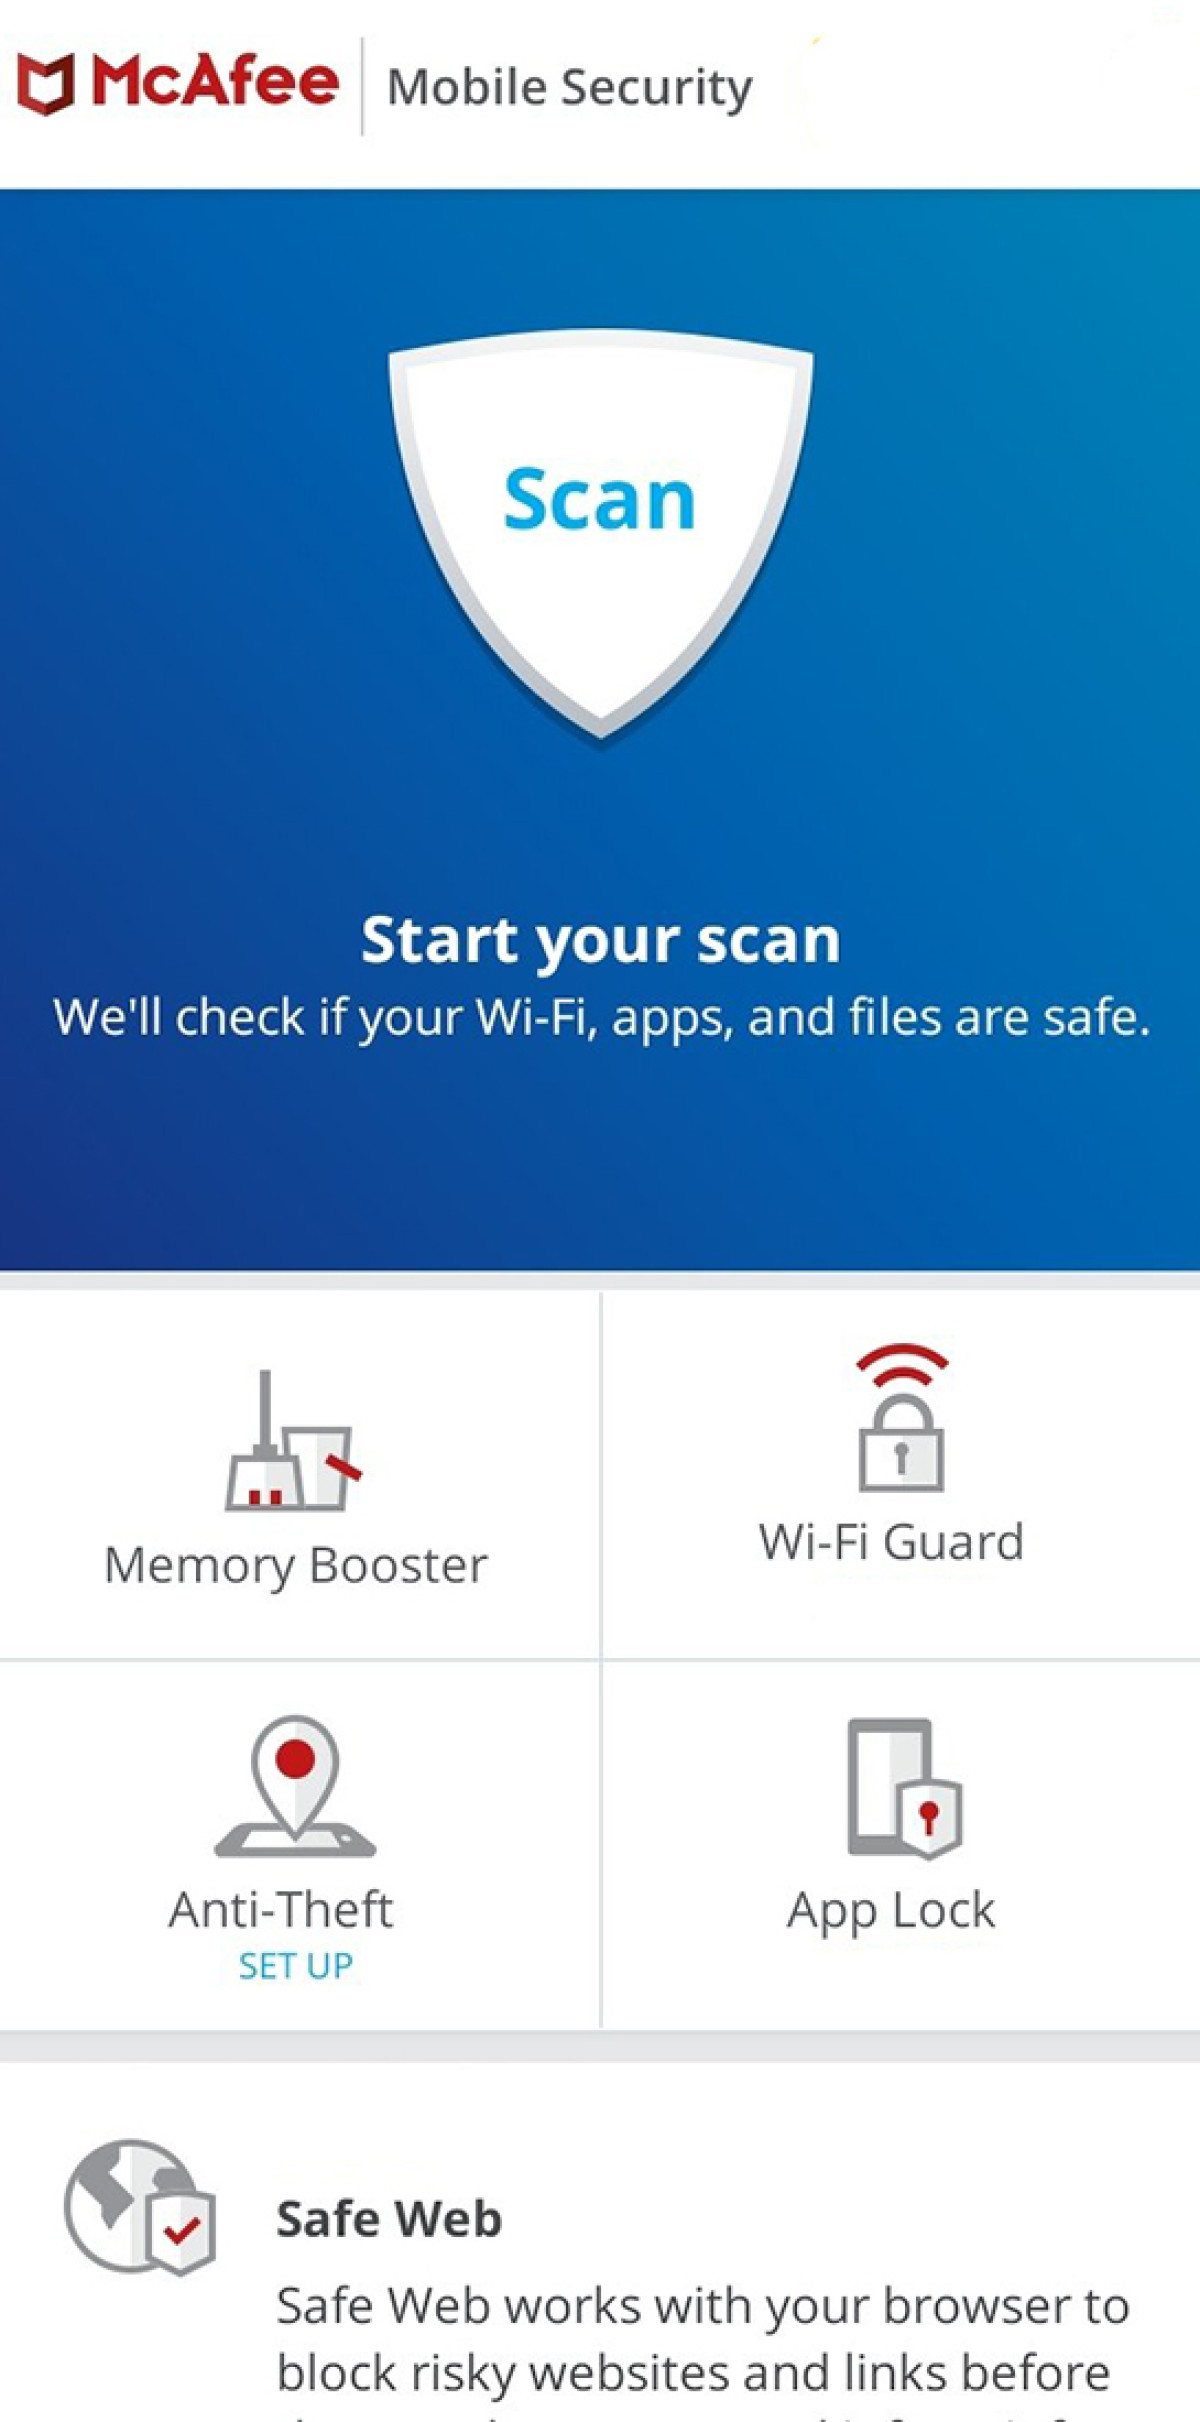 McAfee mobile security for Chromebook